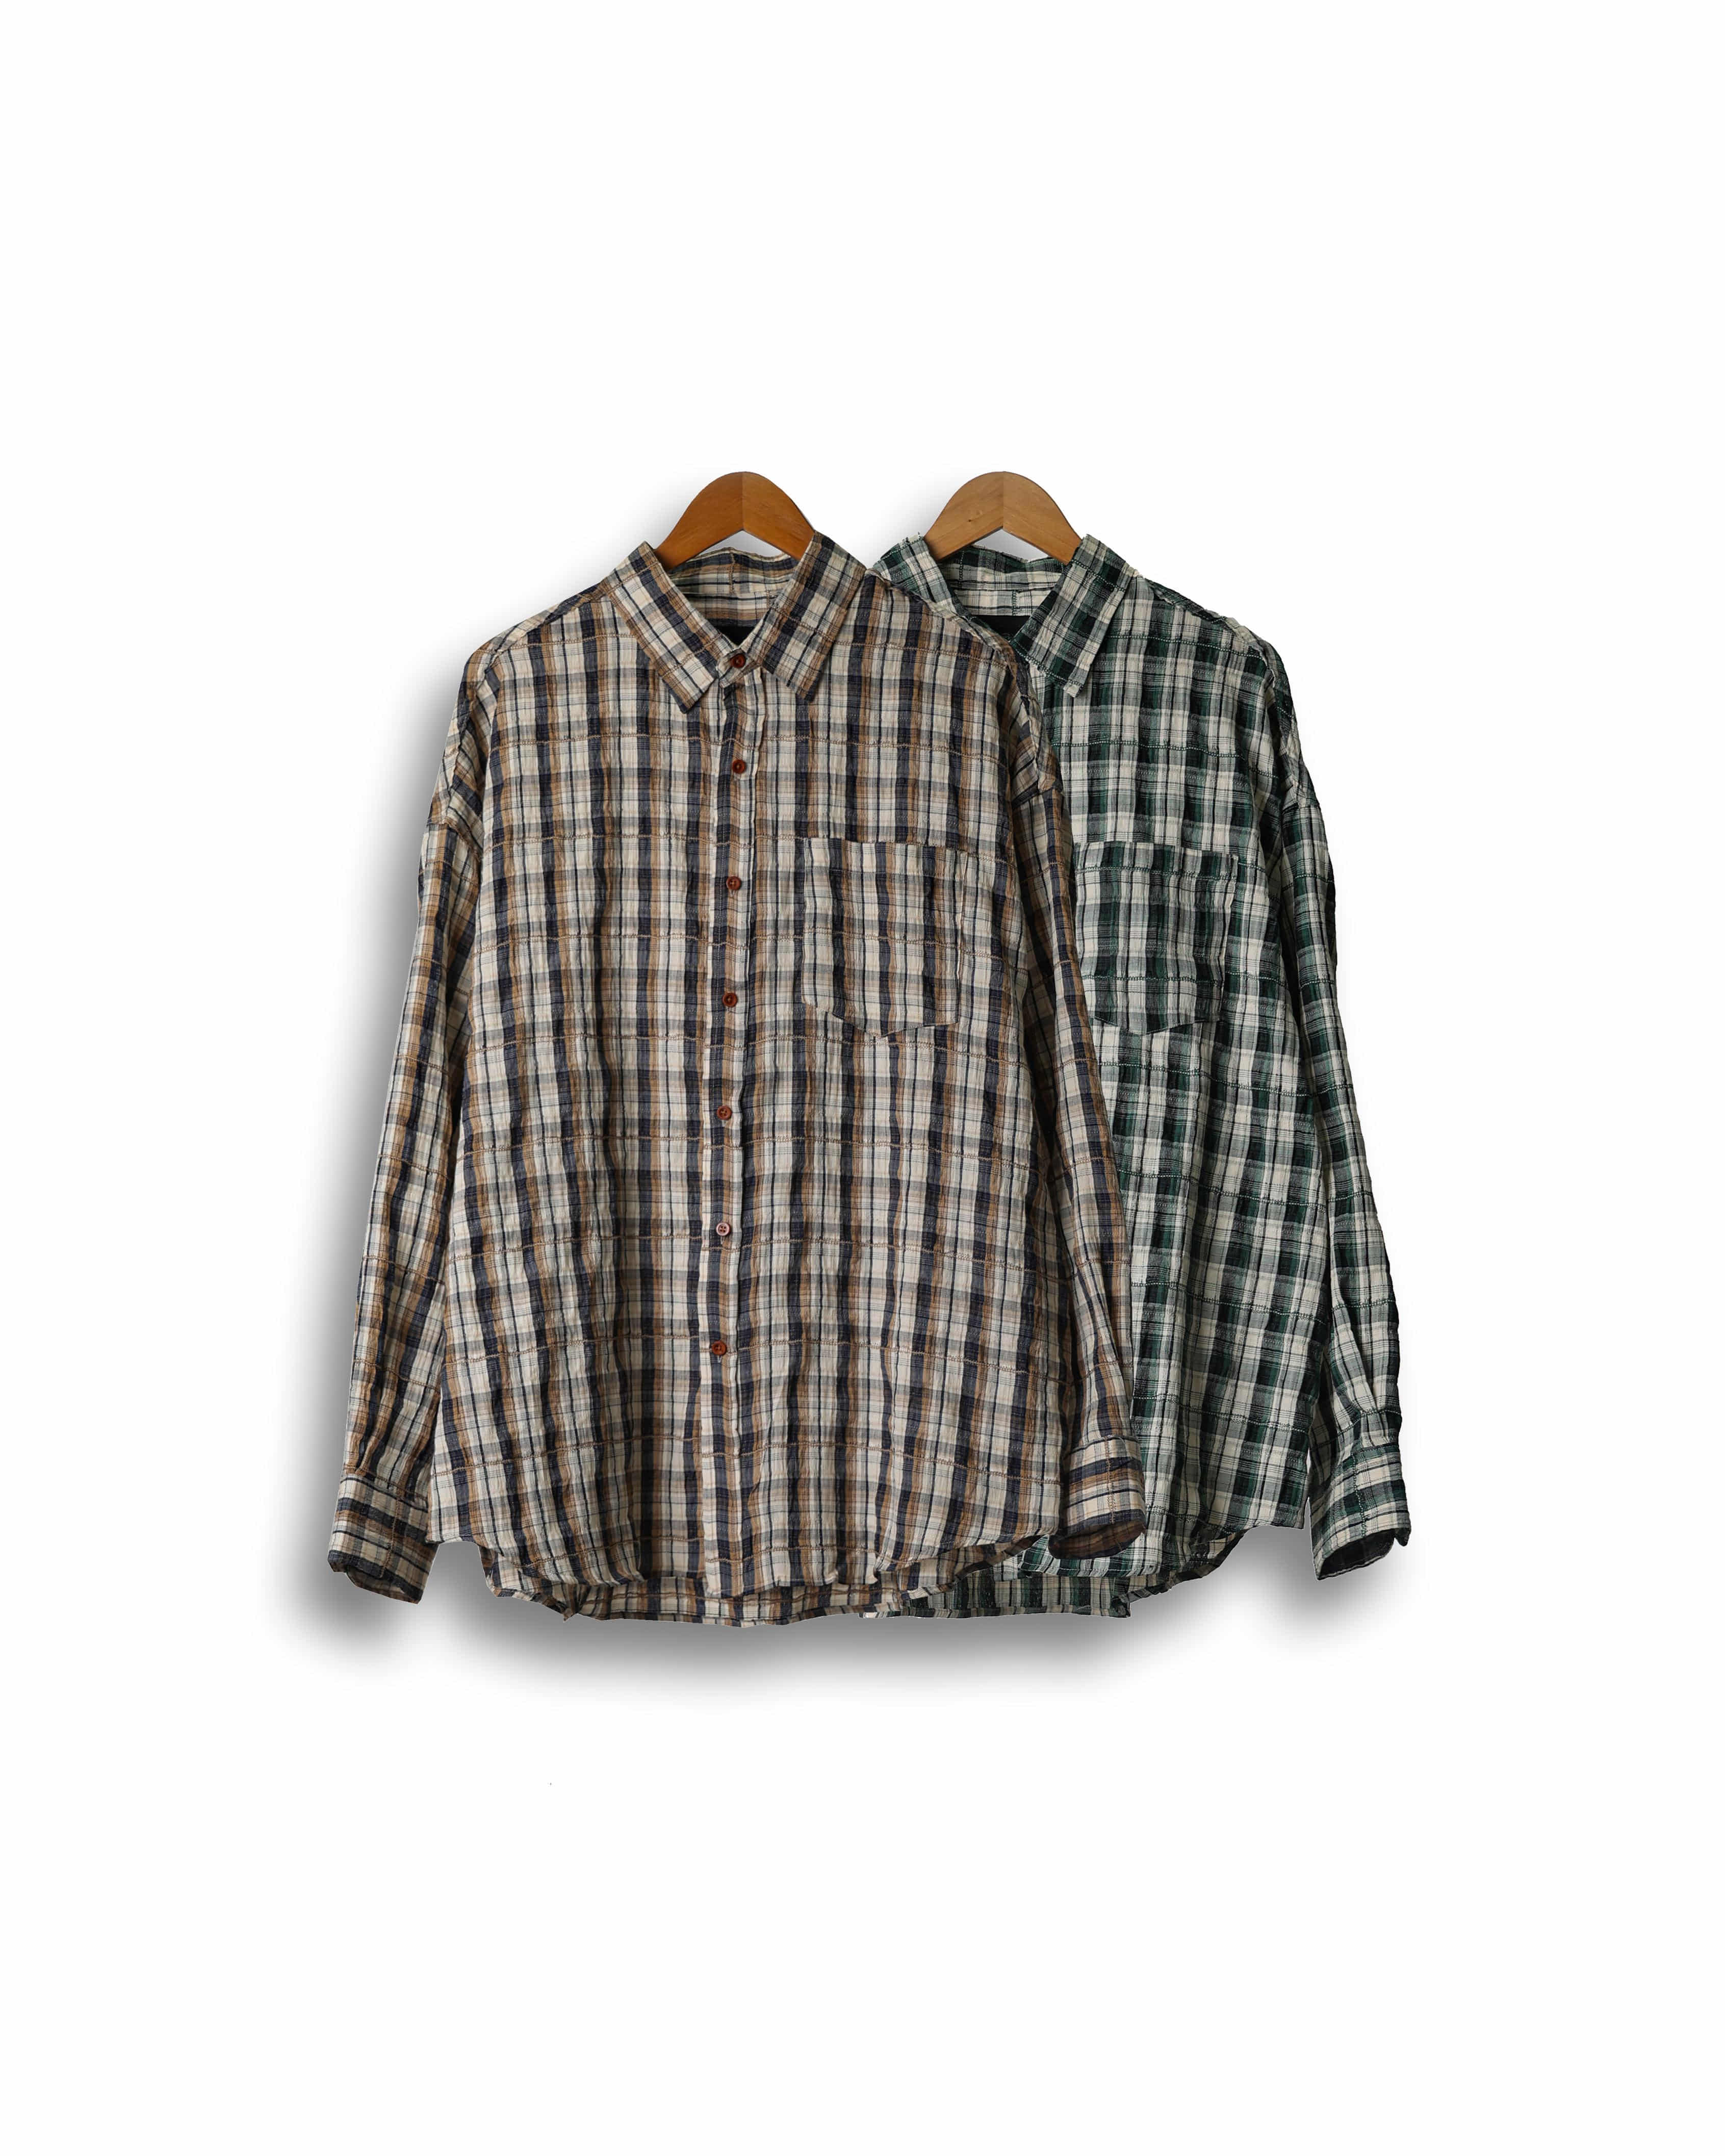 FITS 358 SWALLO Vintage Check Shirts (Beige/Green)